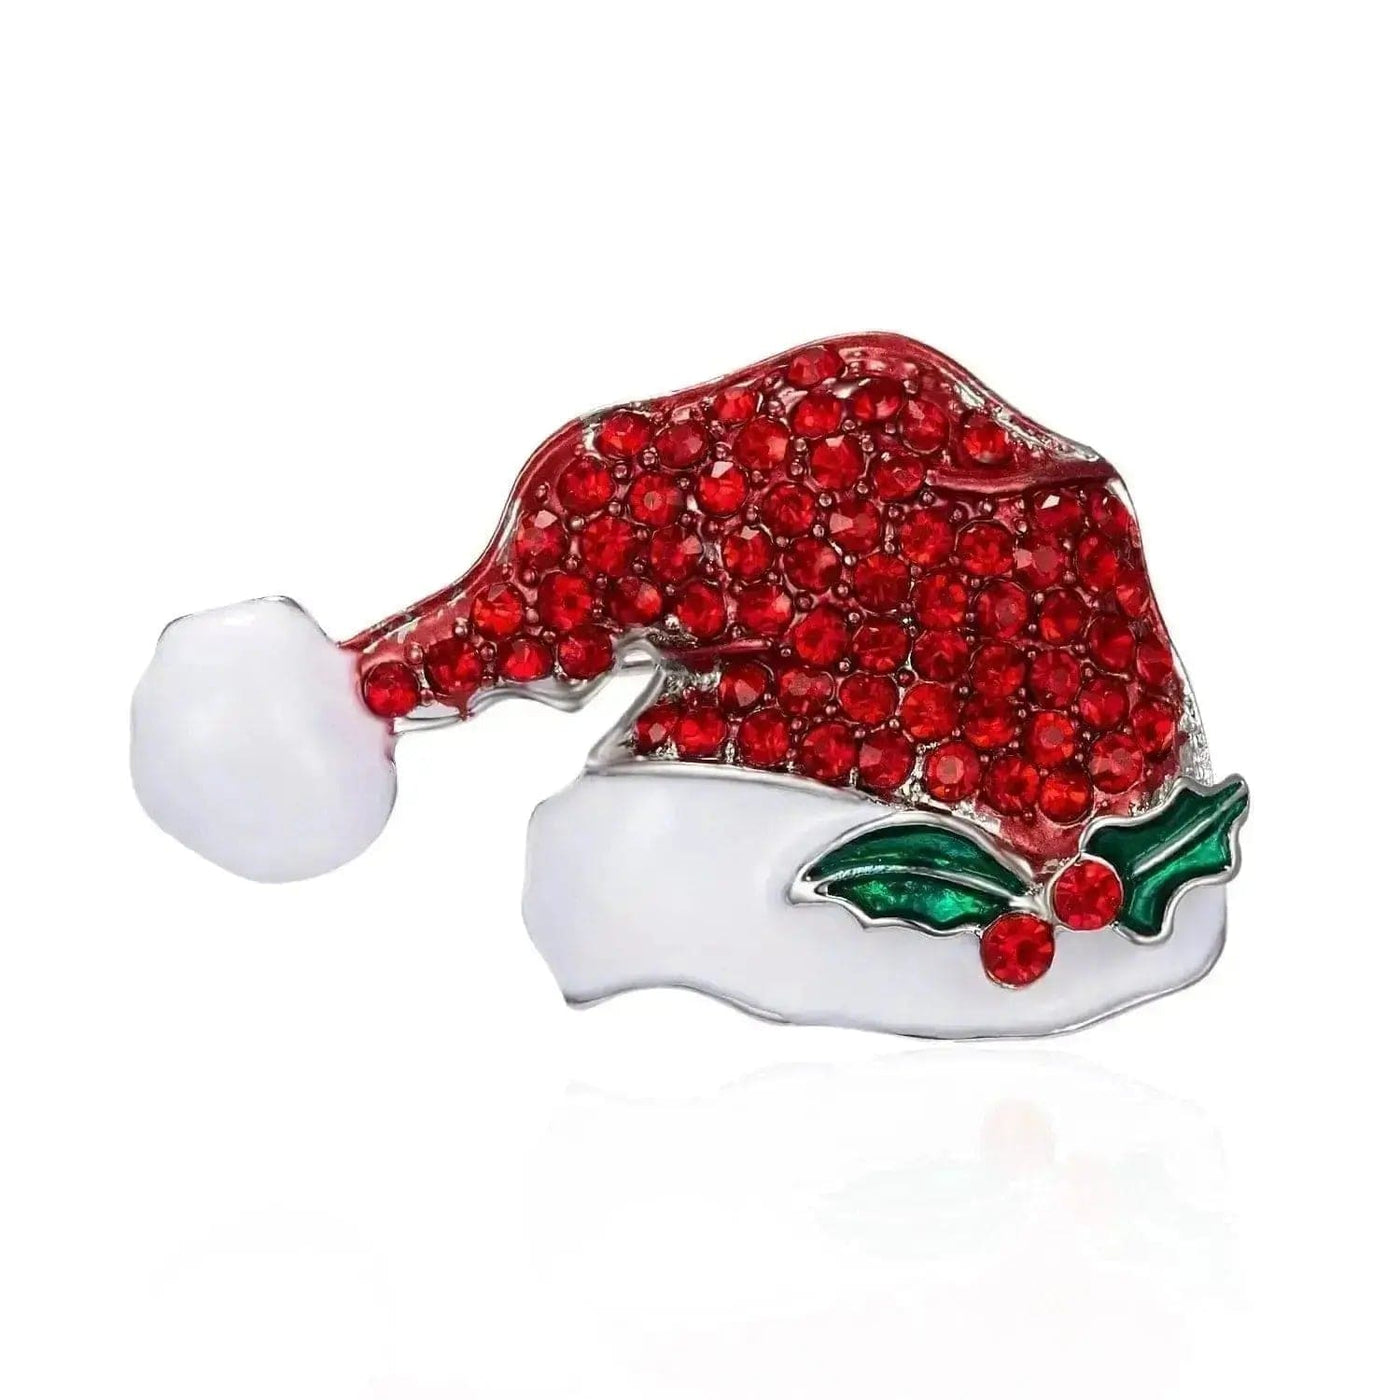 BROOCHITON Brooches 18style Christmas brooch pins for women